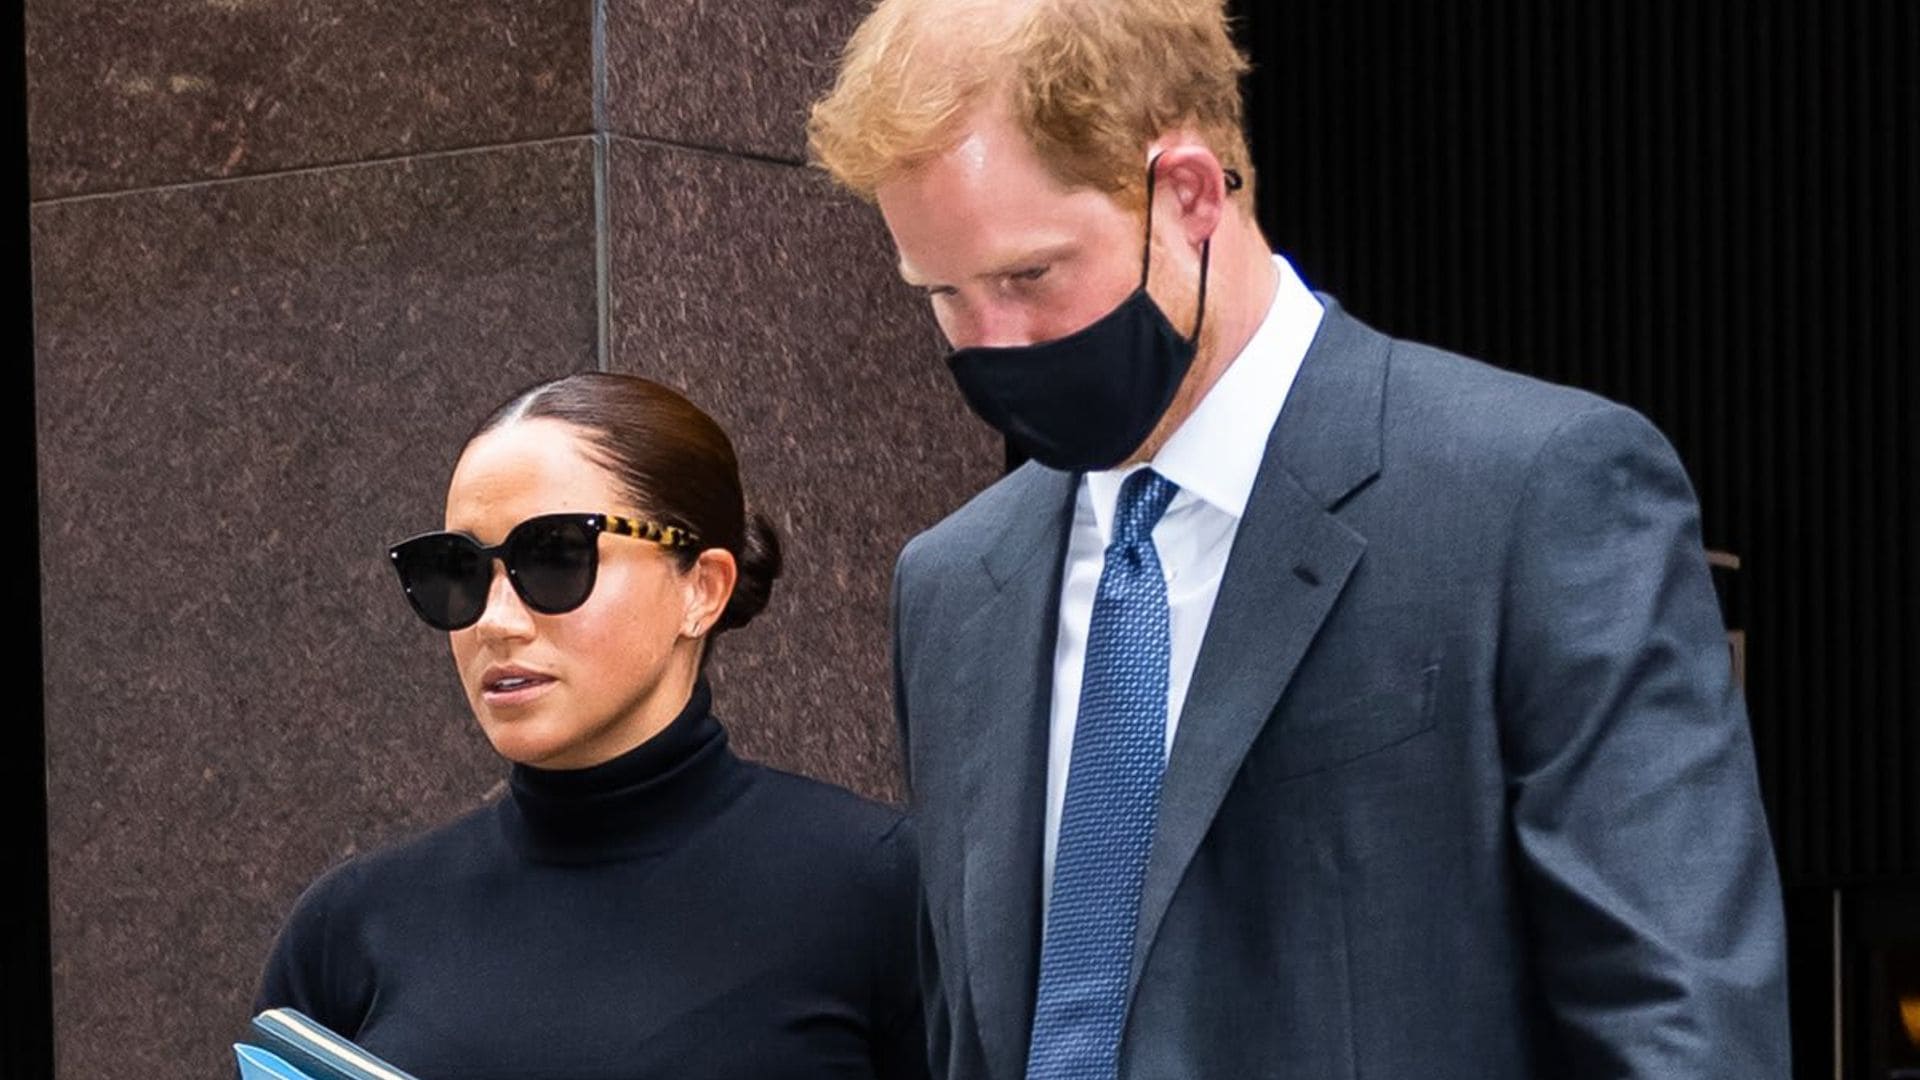 Prince Harry steps out in NYC with adorable tribute to son Archie